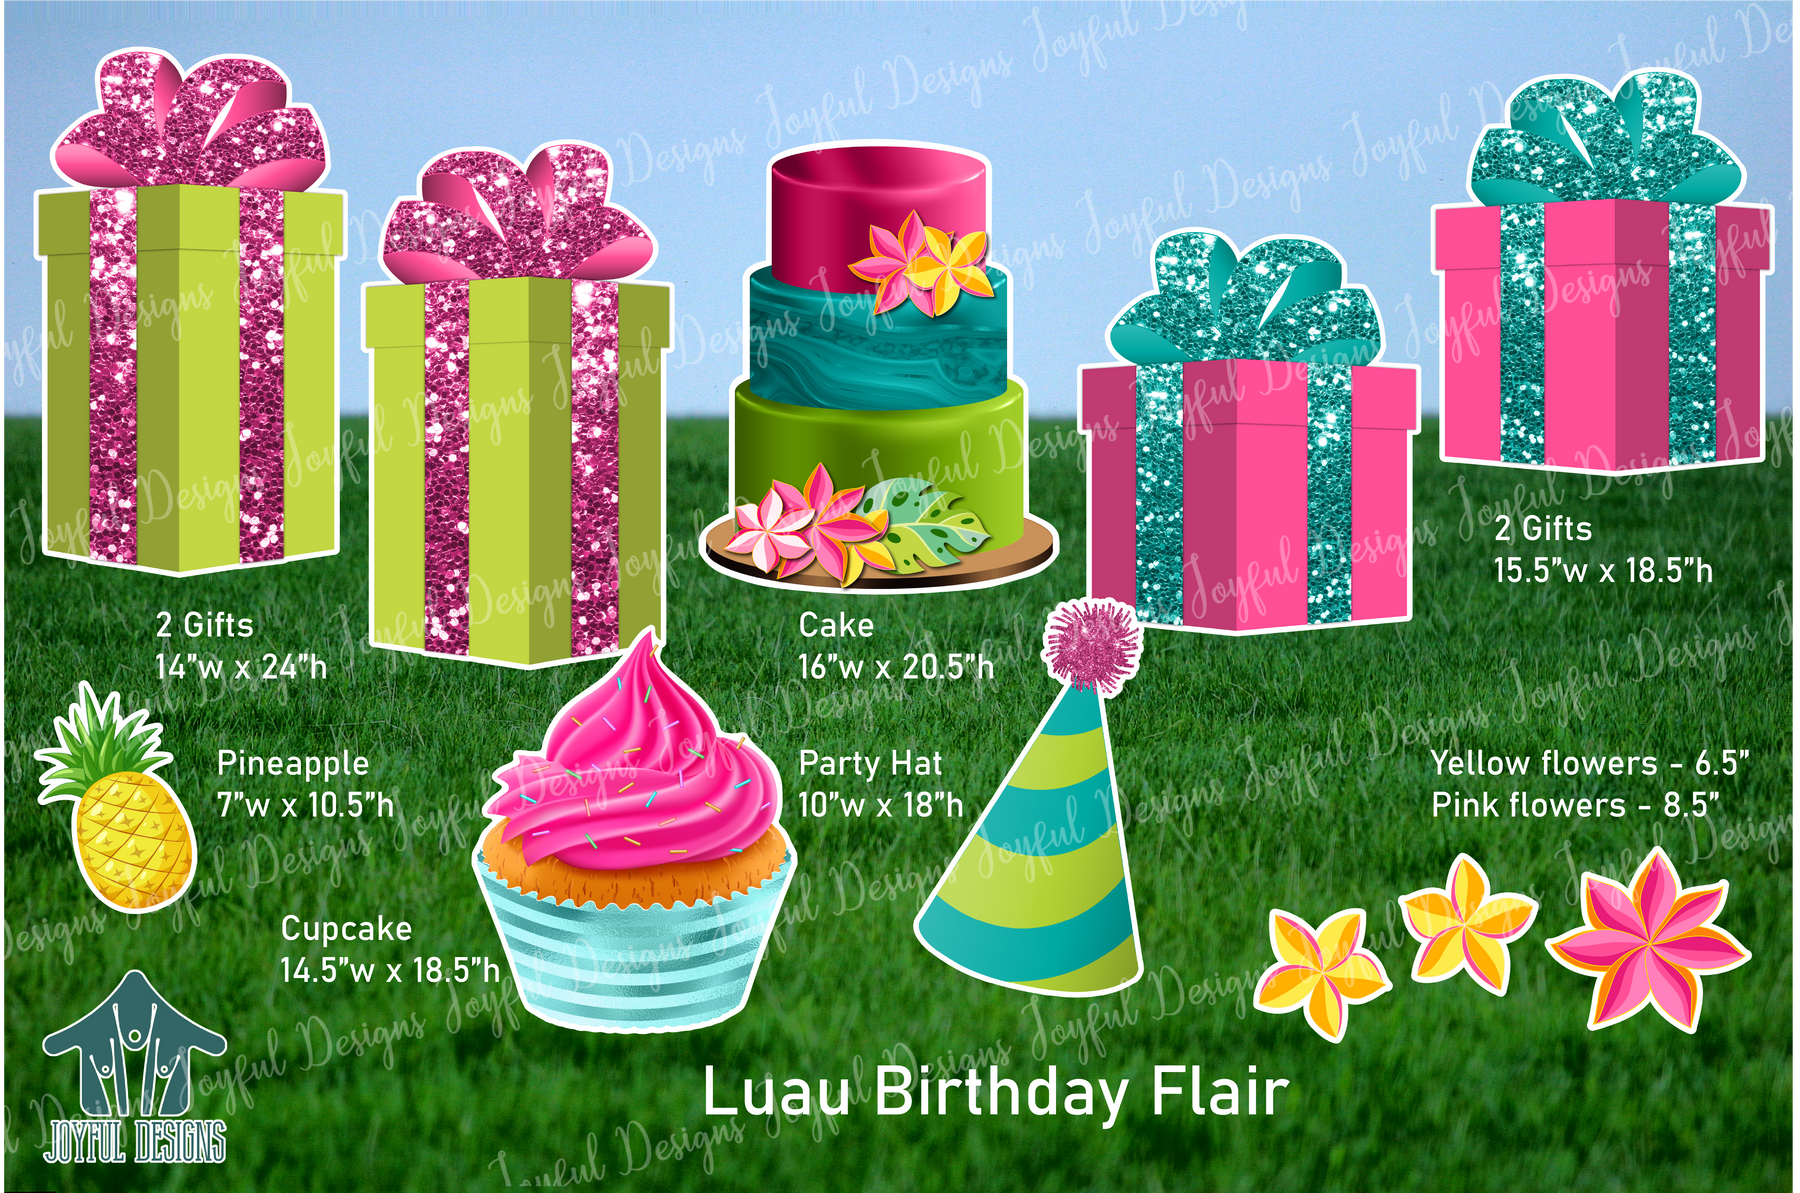 Luau Birthday Flair Half from "One and Done" Set